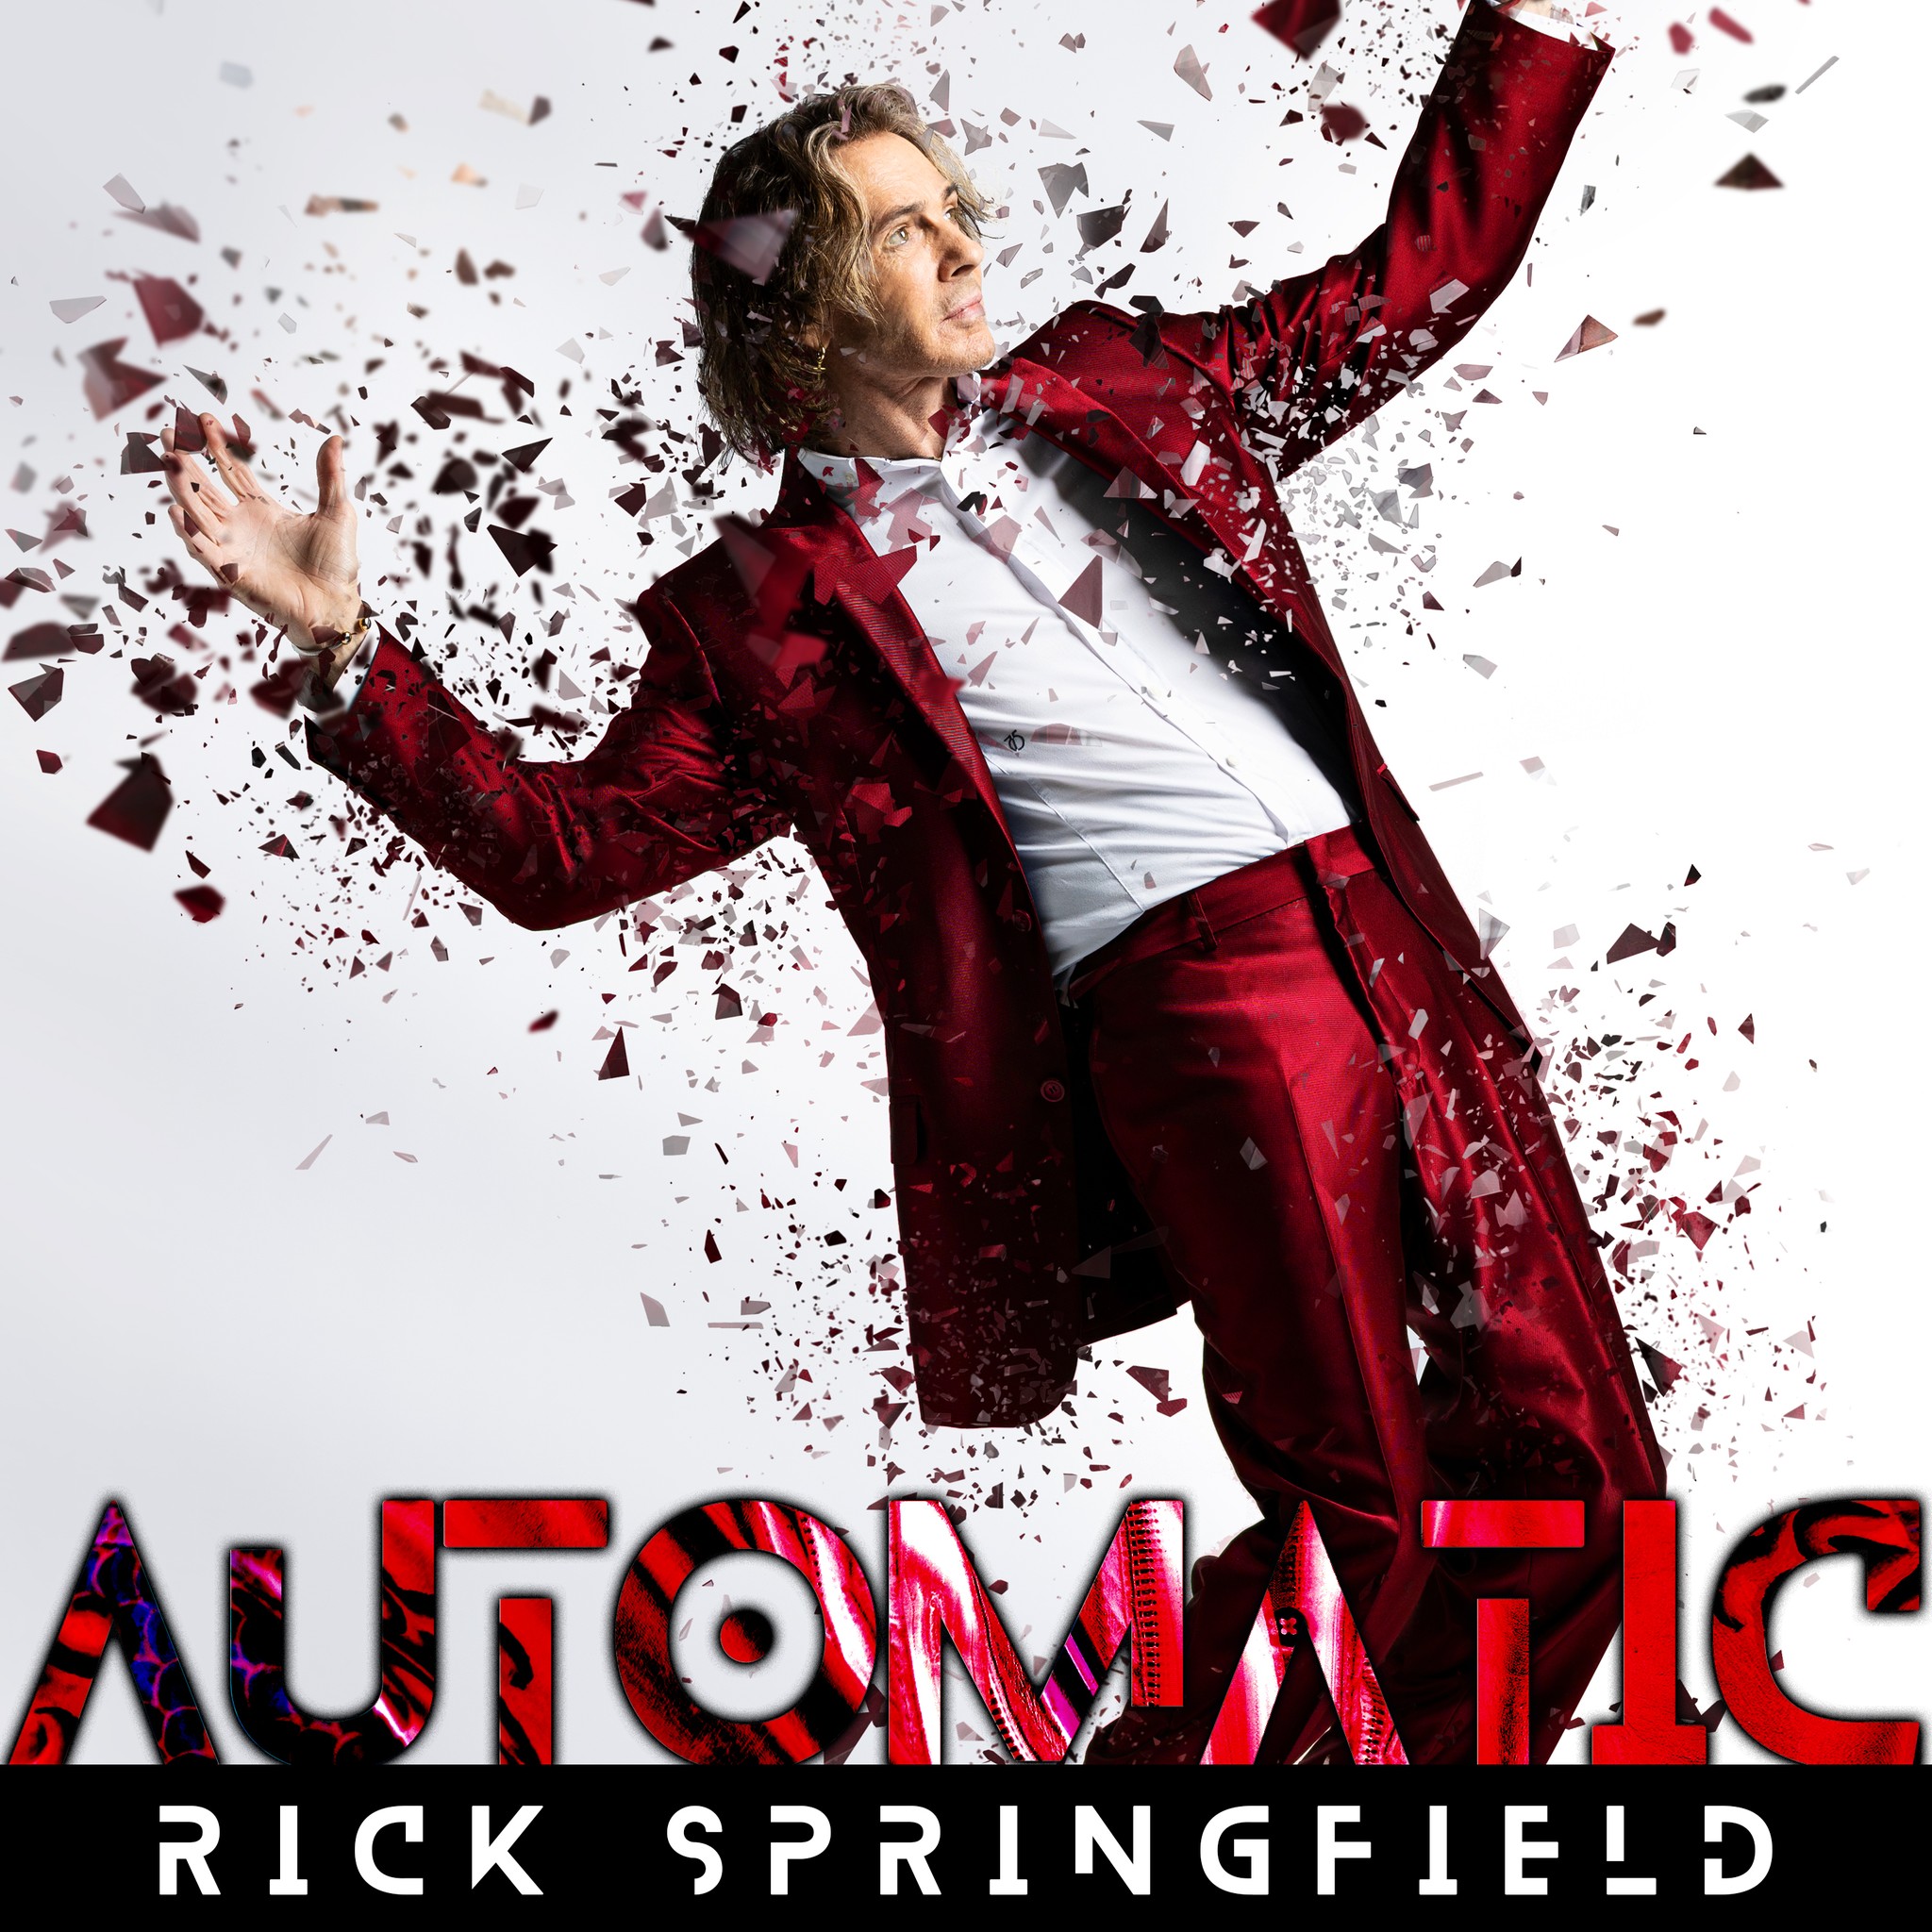 RICK SPRINGFIELD releases two new singles “SHE WALKS WITH THE ANGELS